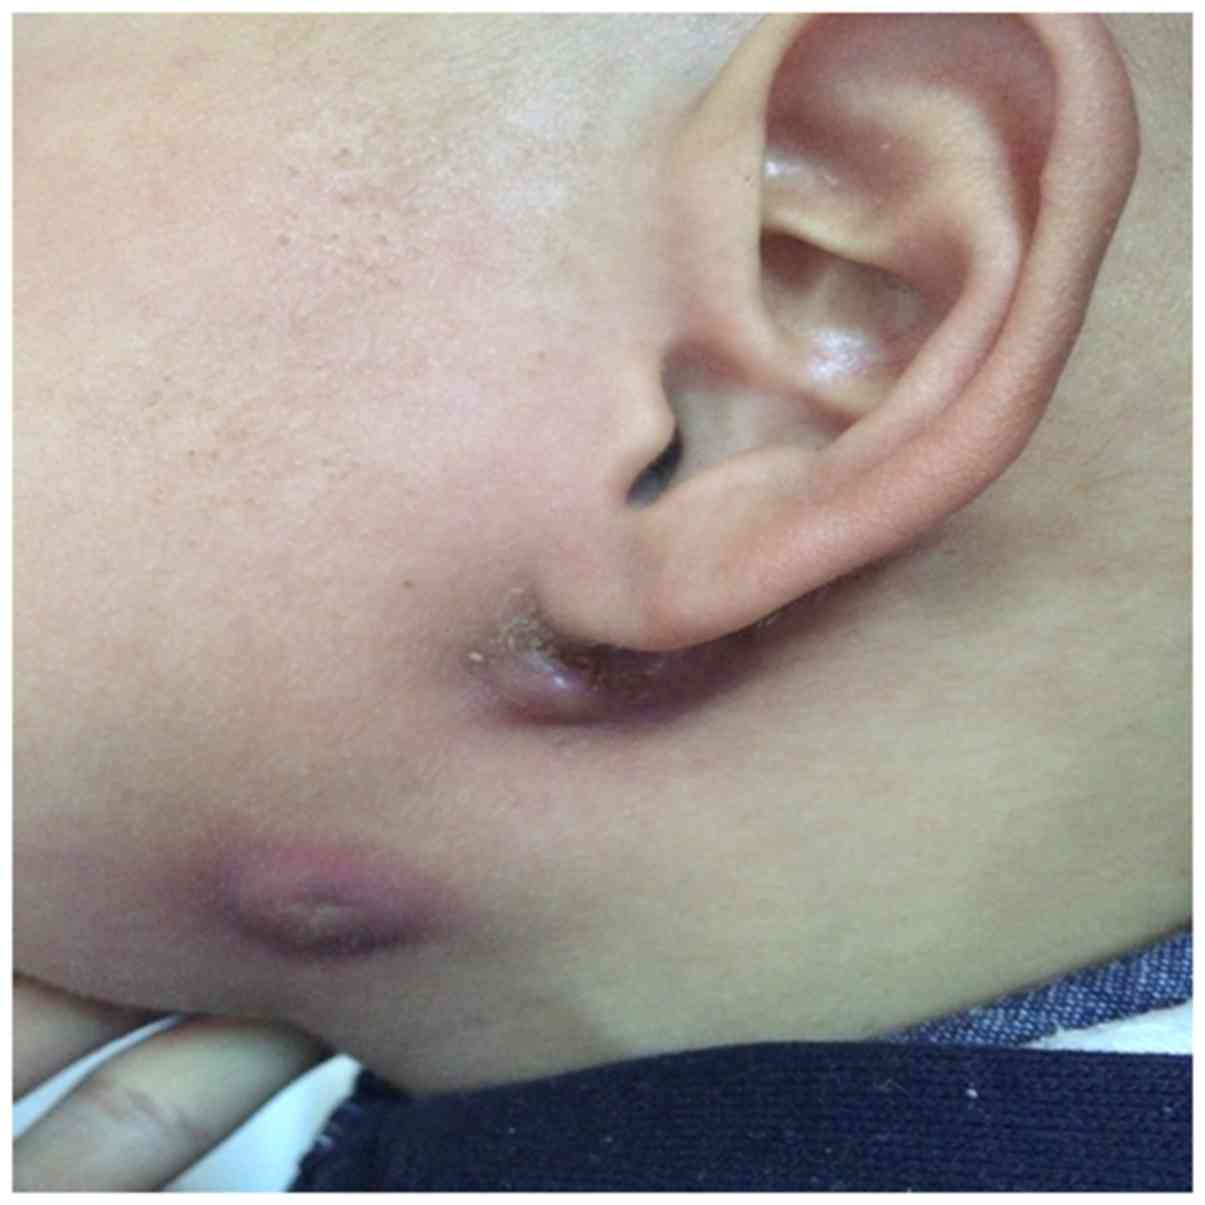 Branchial cleft cyst